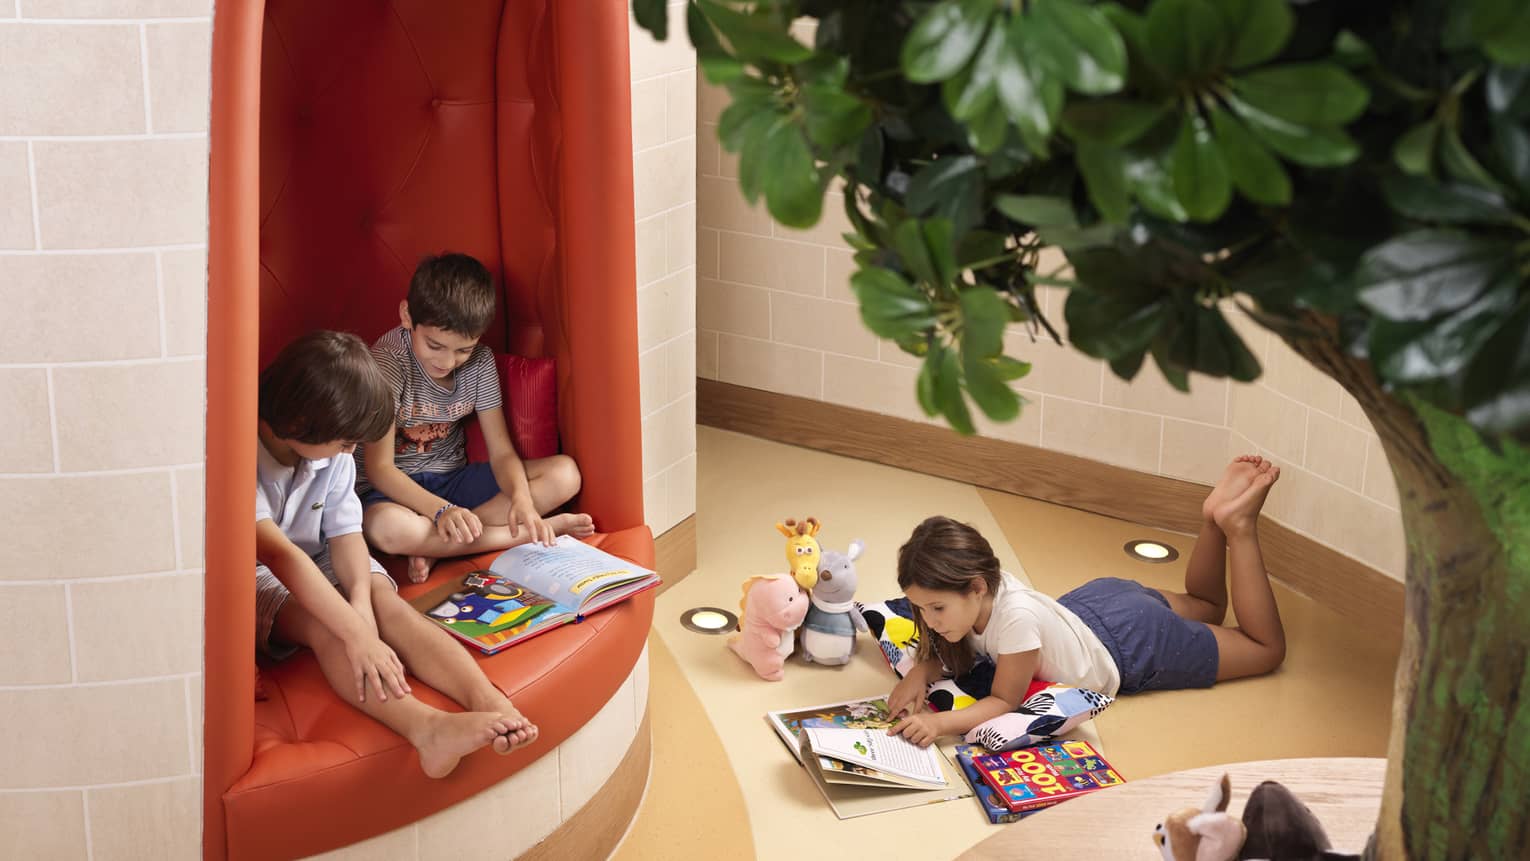 A child lays on the floor reading a book while two other children sit in a red tufted booth reading another book